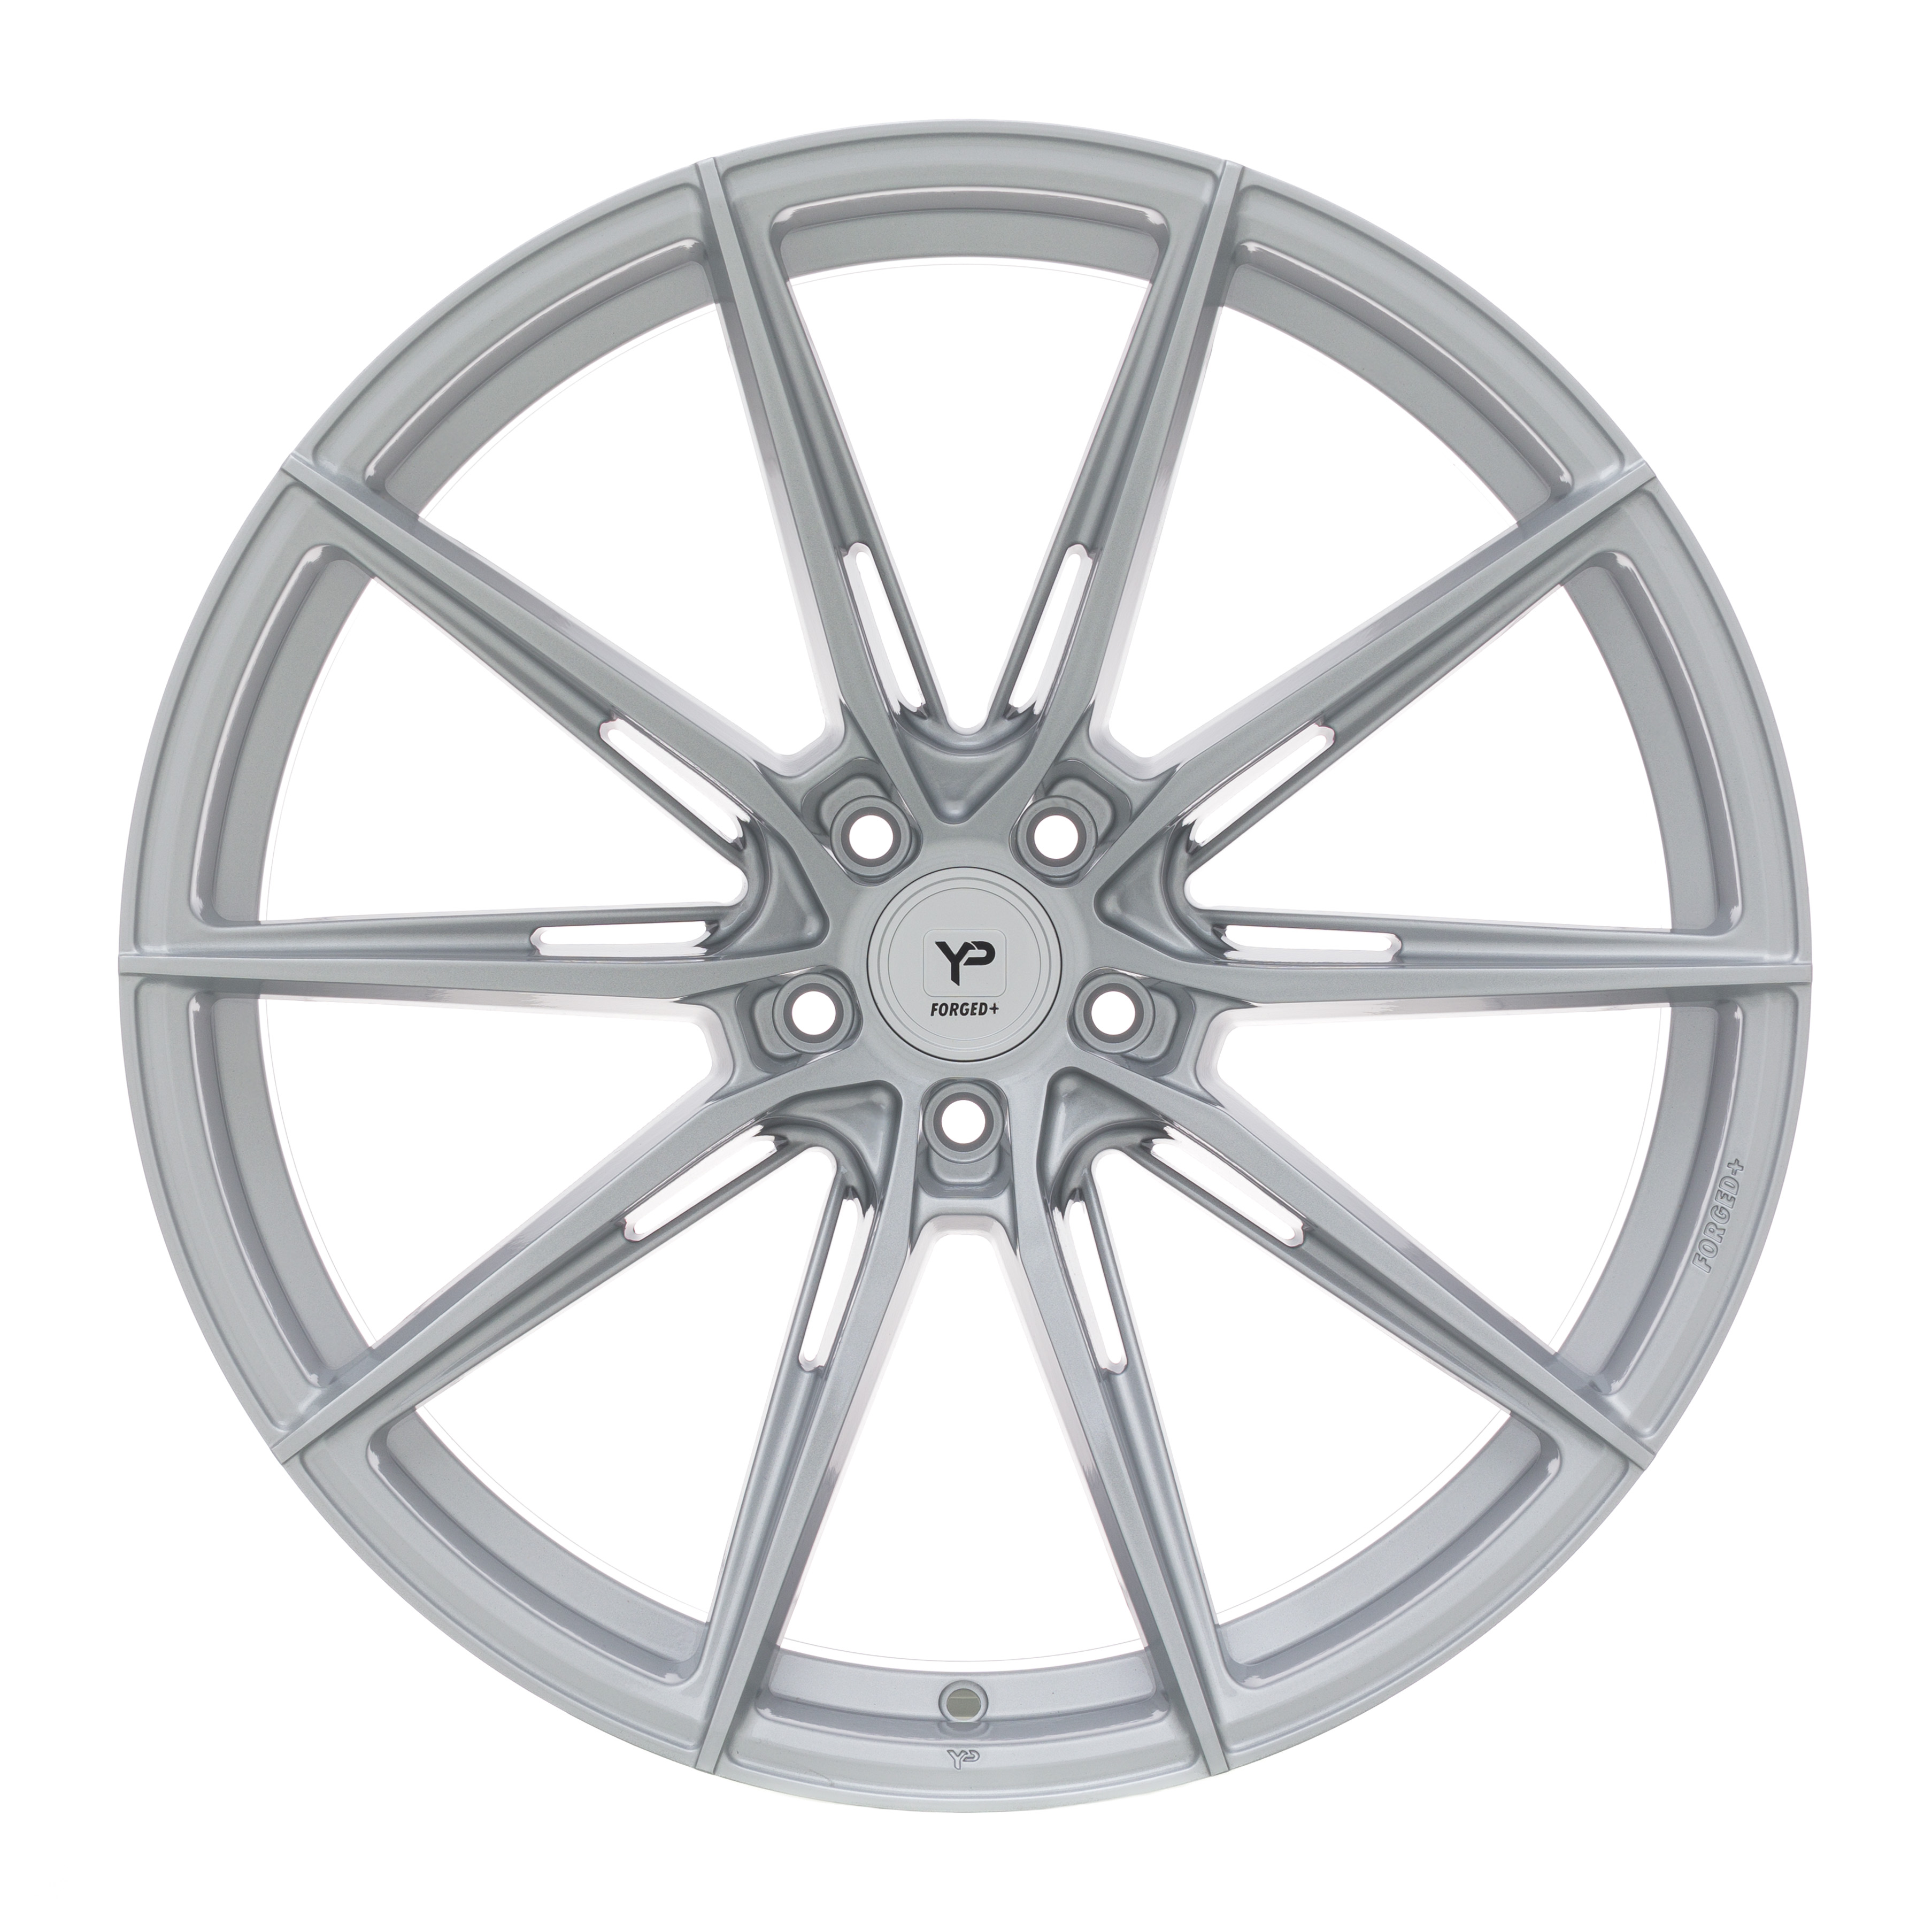 Yido Performance Forged+ 2 20 Zoll (F-2974)